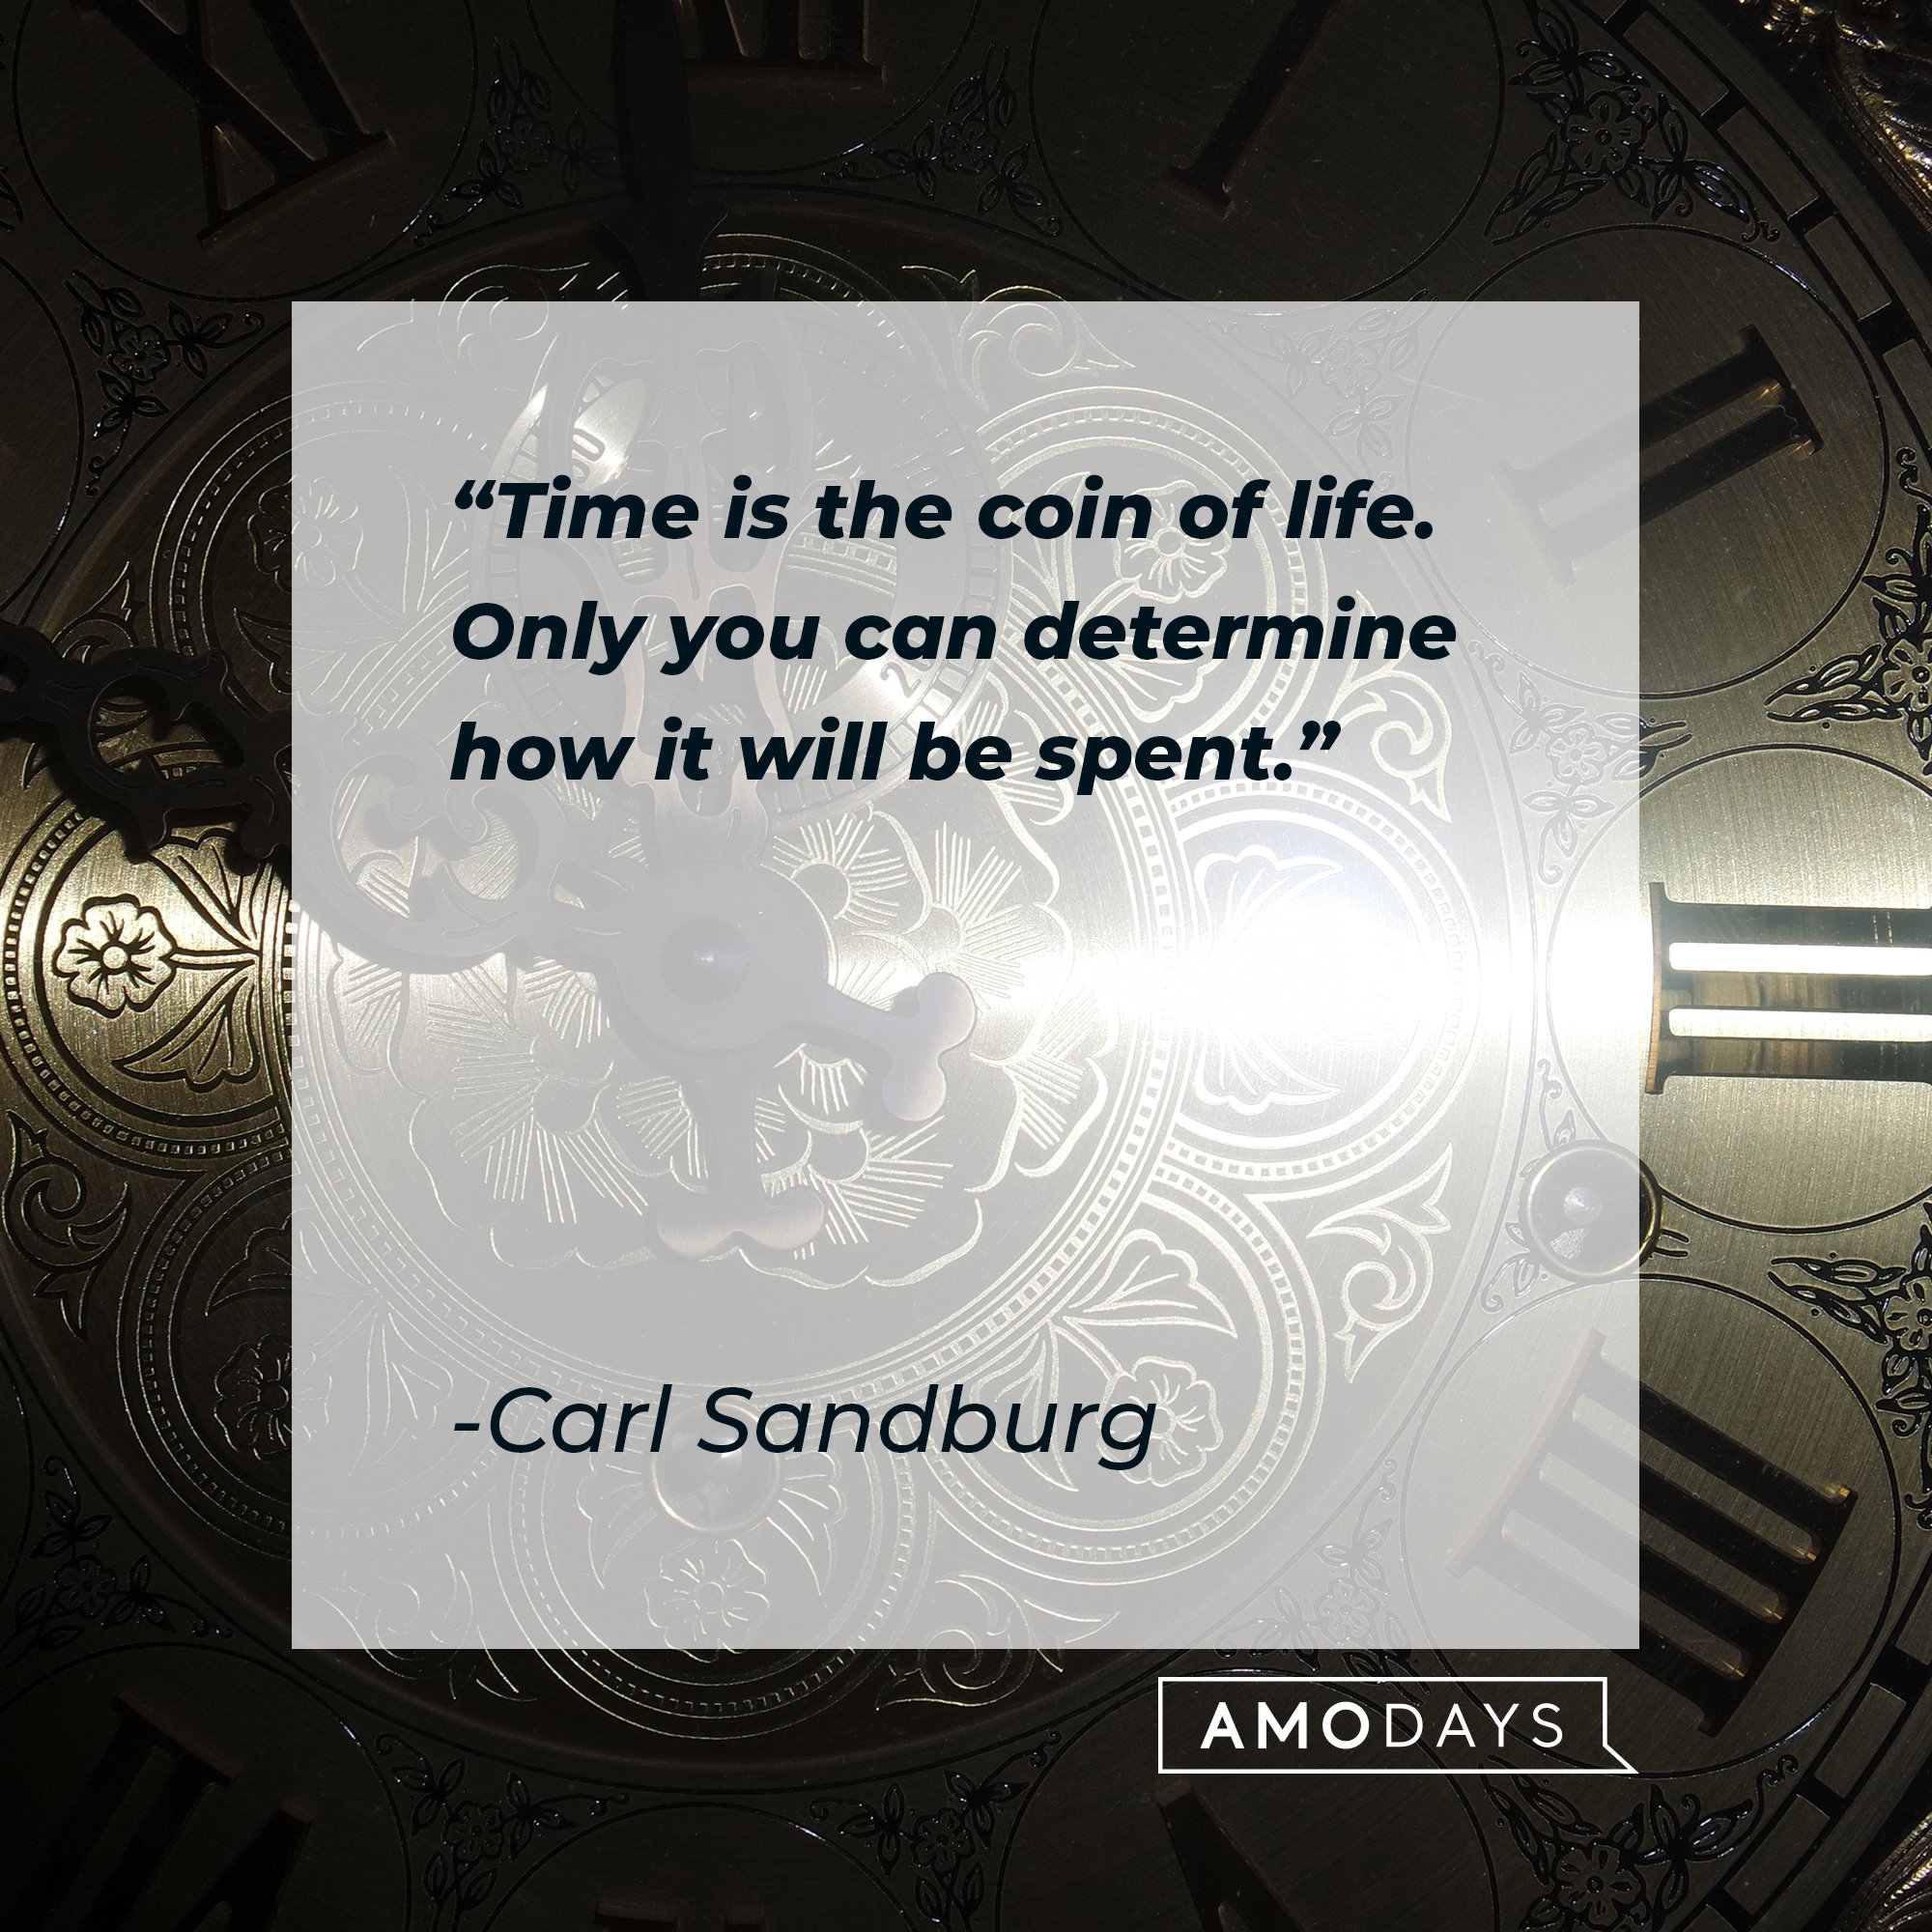 Carl Sandburg's quote: "Time is the coin of life. Only you can determine how it will be spent."  | Image: AmoDays